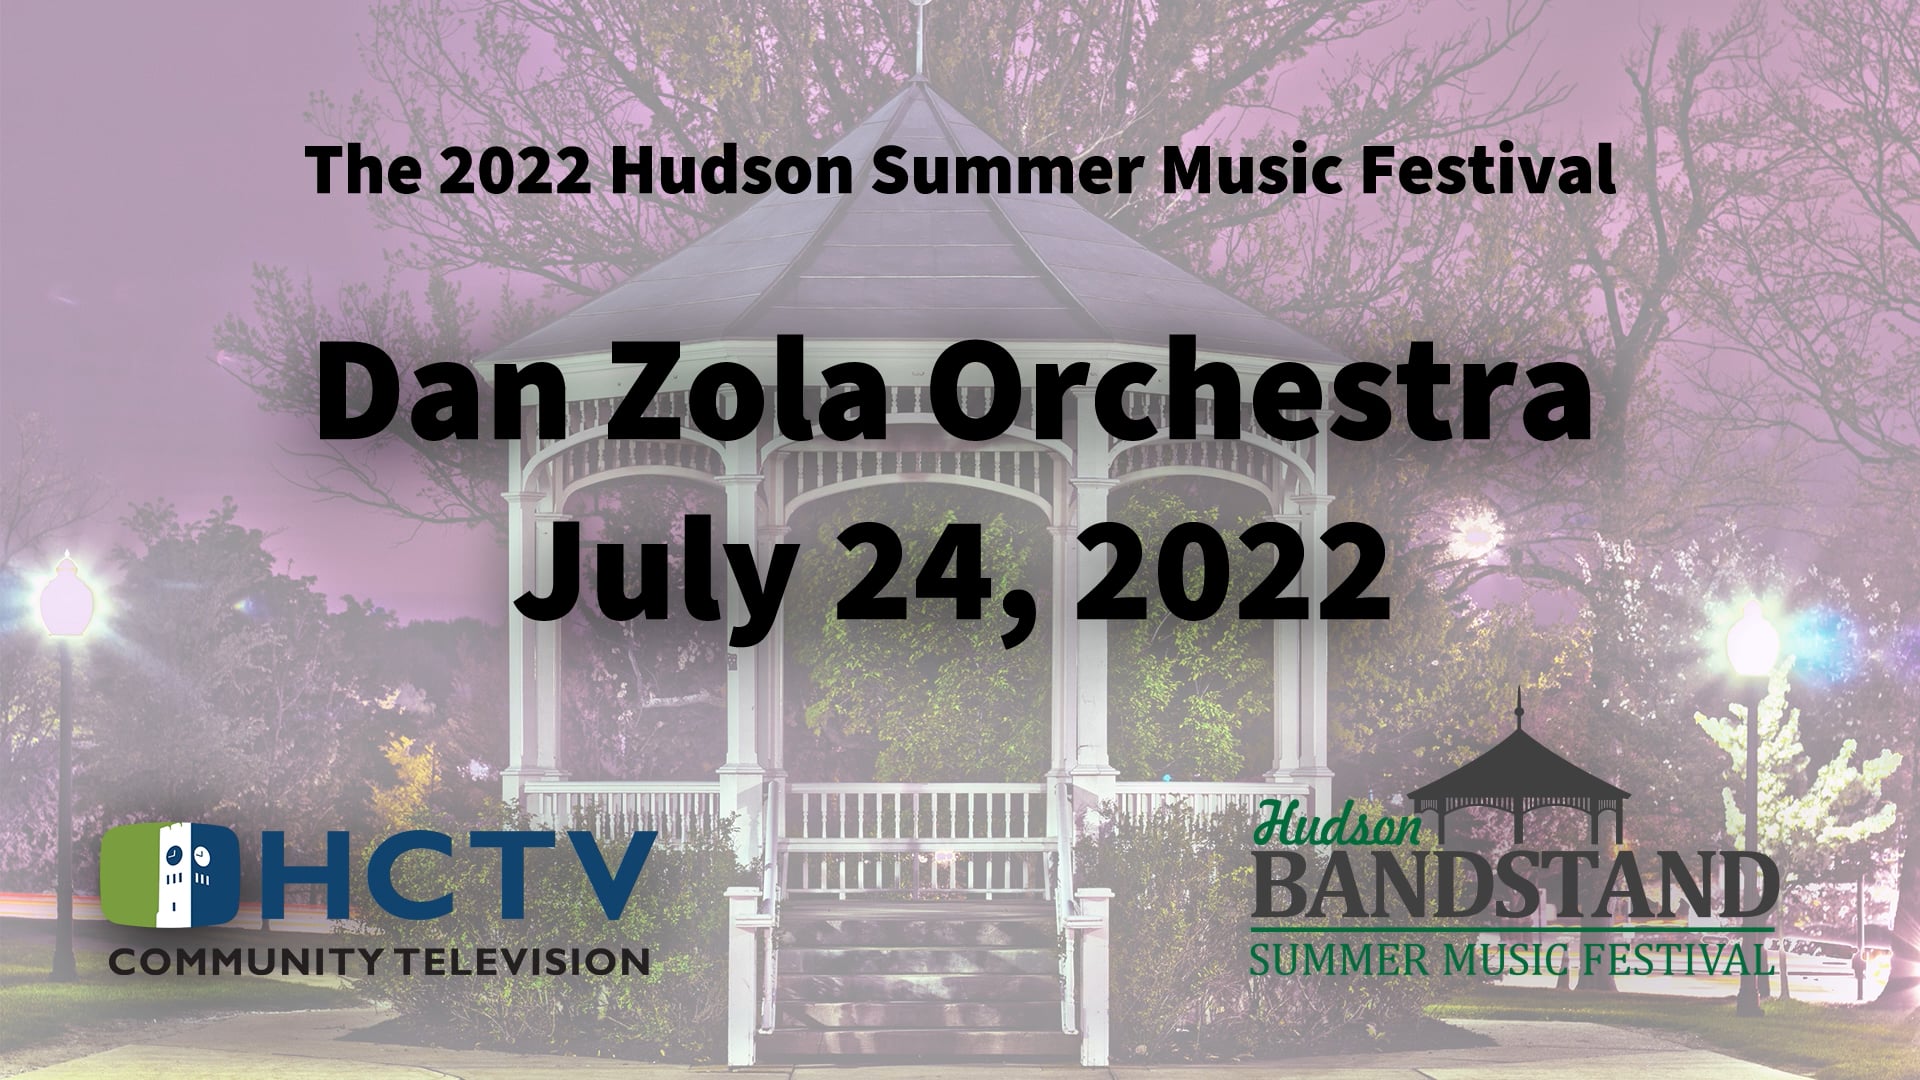 Concert On The Green - Dan Zola Orchestra, 2022